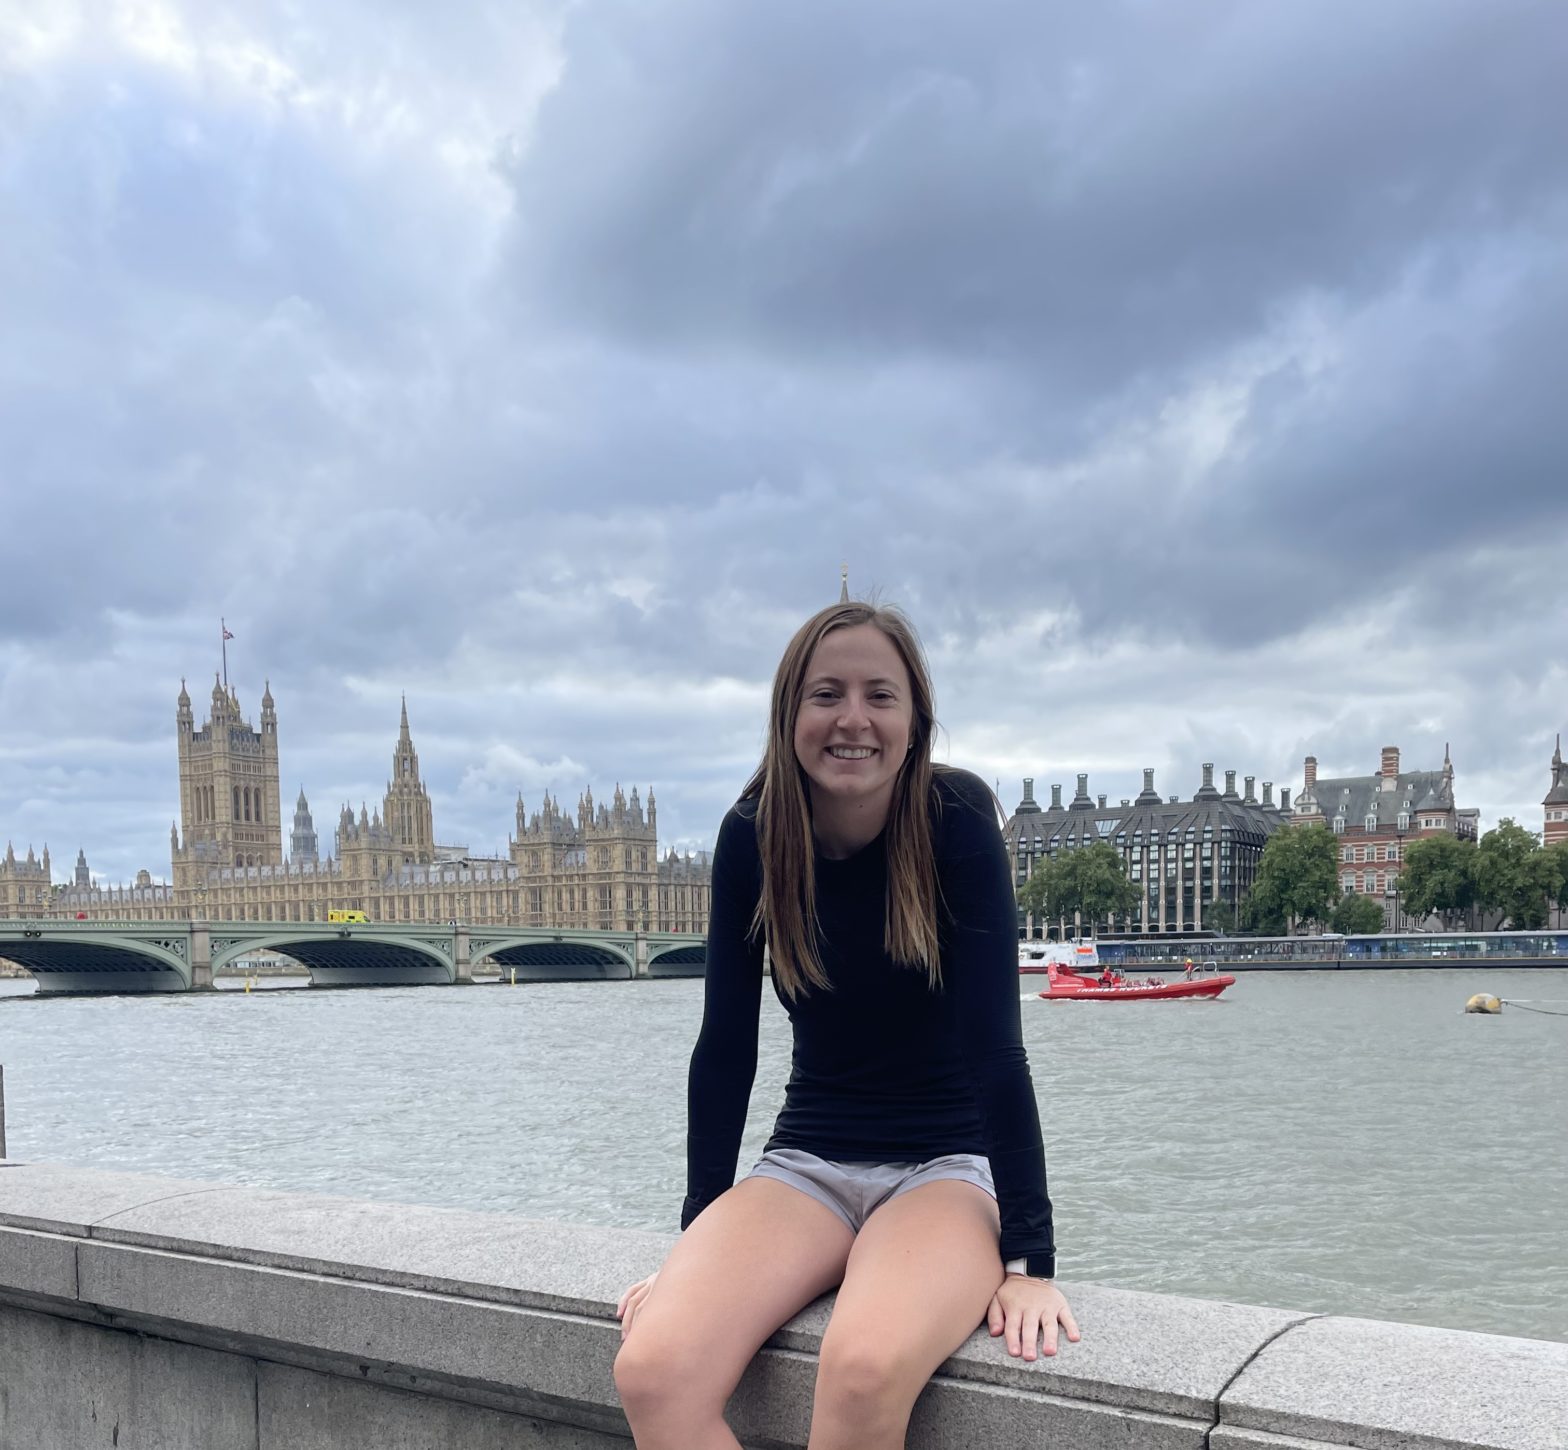 Anxious to start exploring the city, this was from one of the first days after I had just arrived in the city! A friend and I took a walk along Thames River and got a chance to see more of central London! The House of Parliaments is seen in the background on the left. 